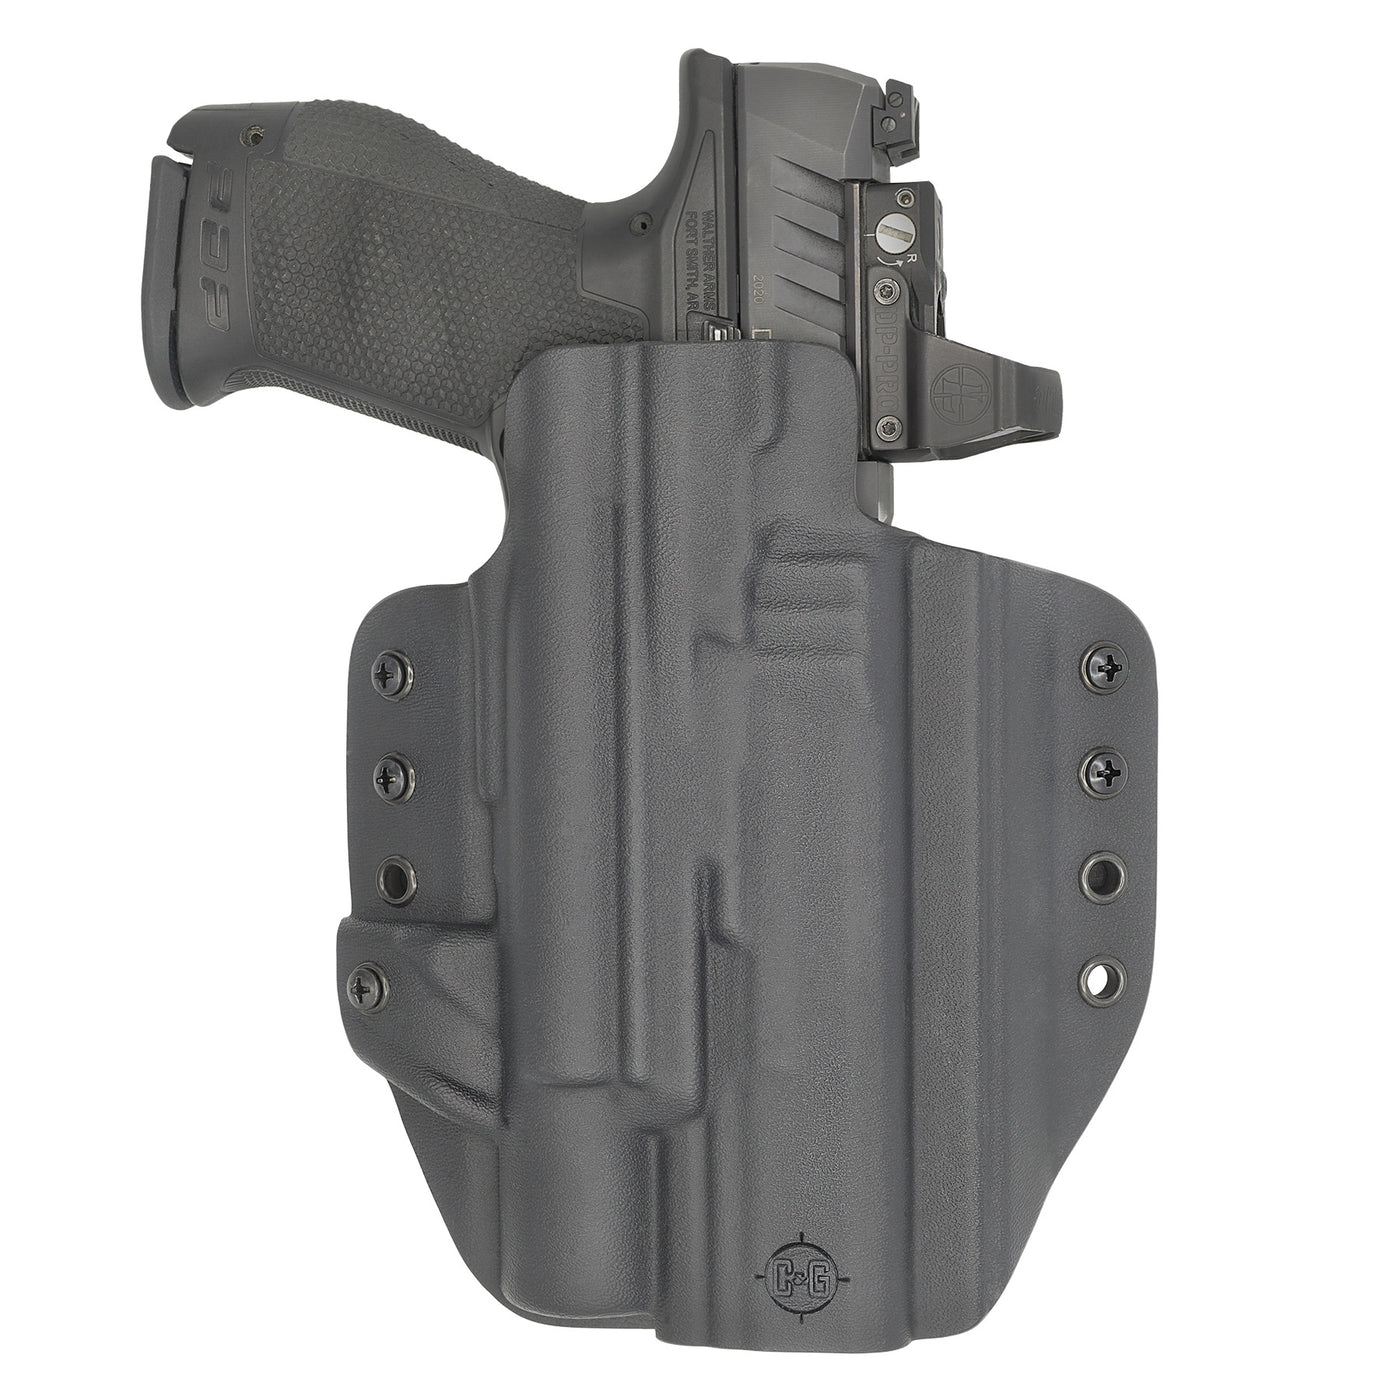 C&G Holsters custom OWB Tactical S&W M&P 9/40 Surefire X300 in holstered position